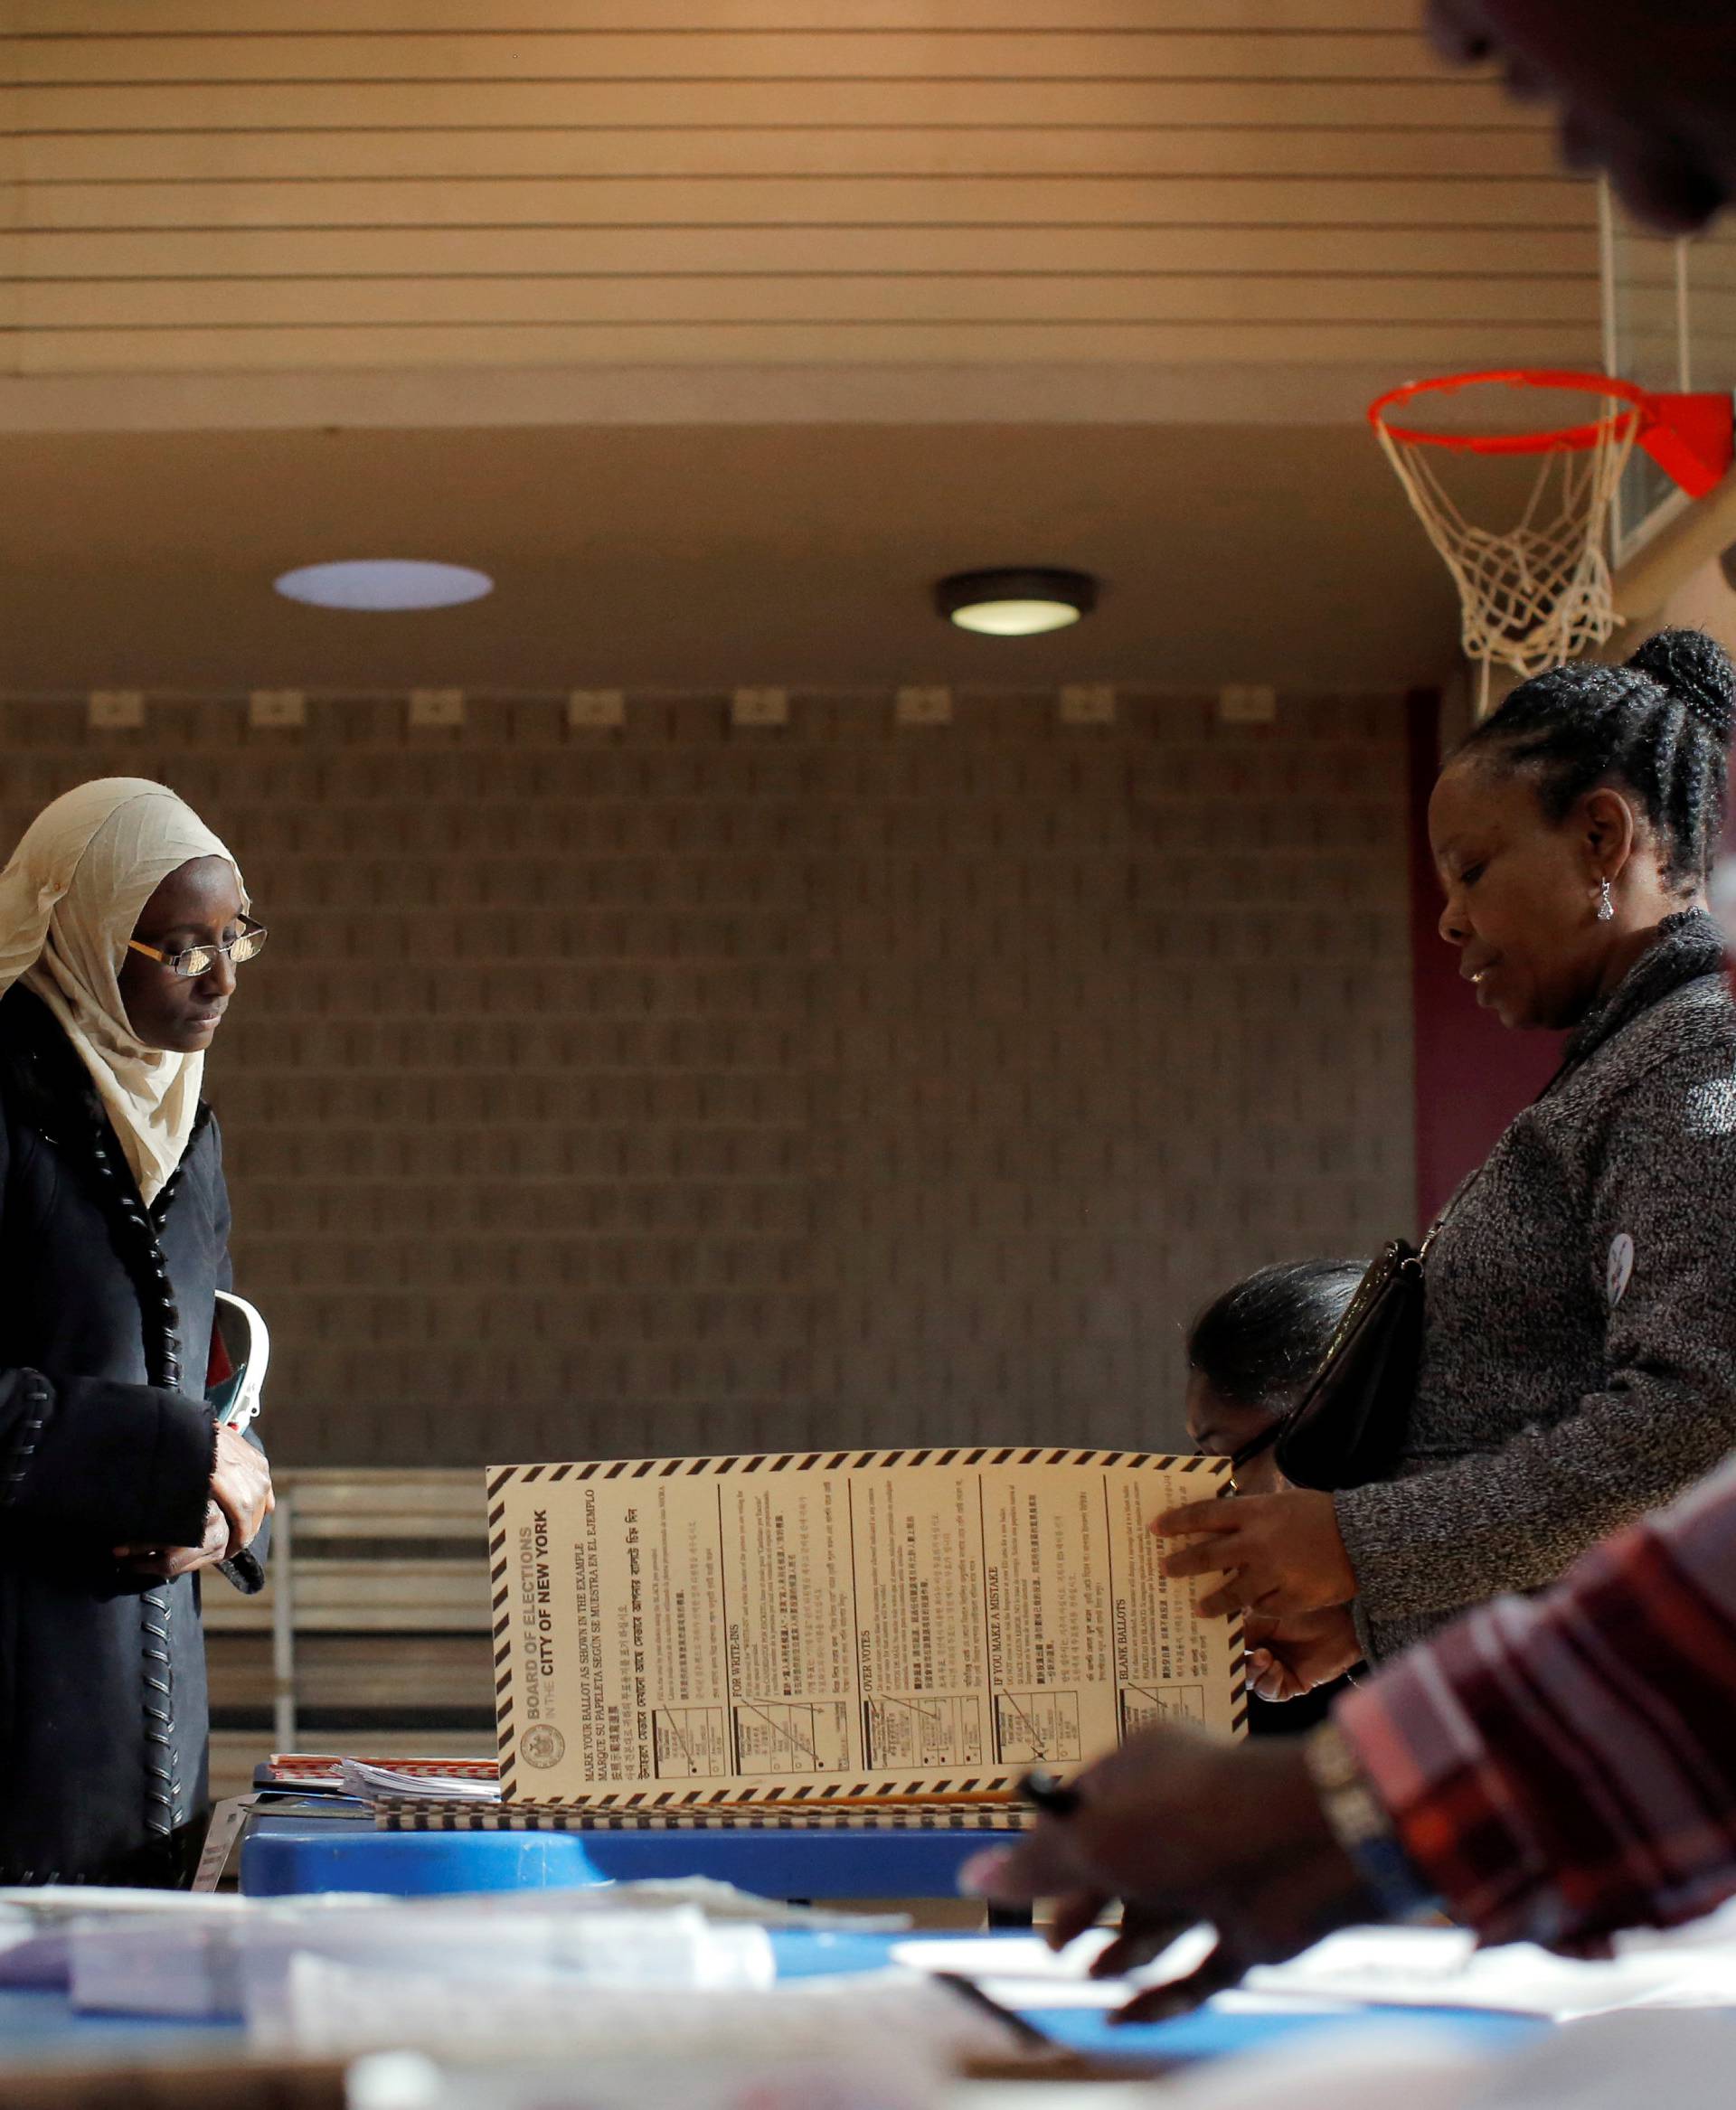 A woman arrives for her voting ballot during the U.S presidential election at the James Weldon Johnson Community Centre in the East Harlem neighbourhood of Manhattan, New York